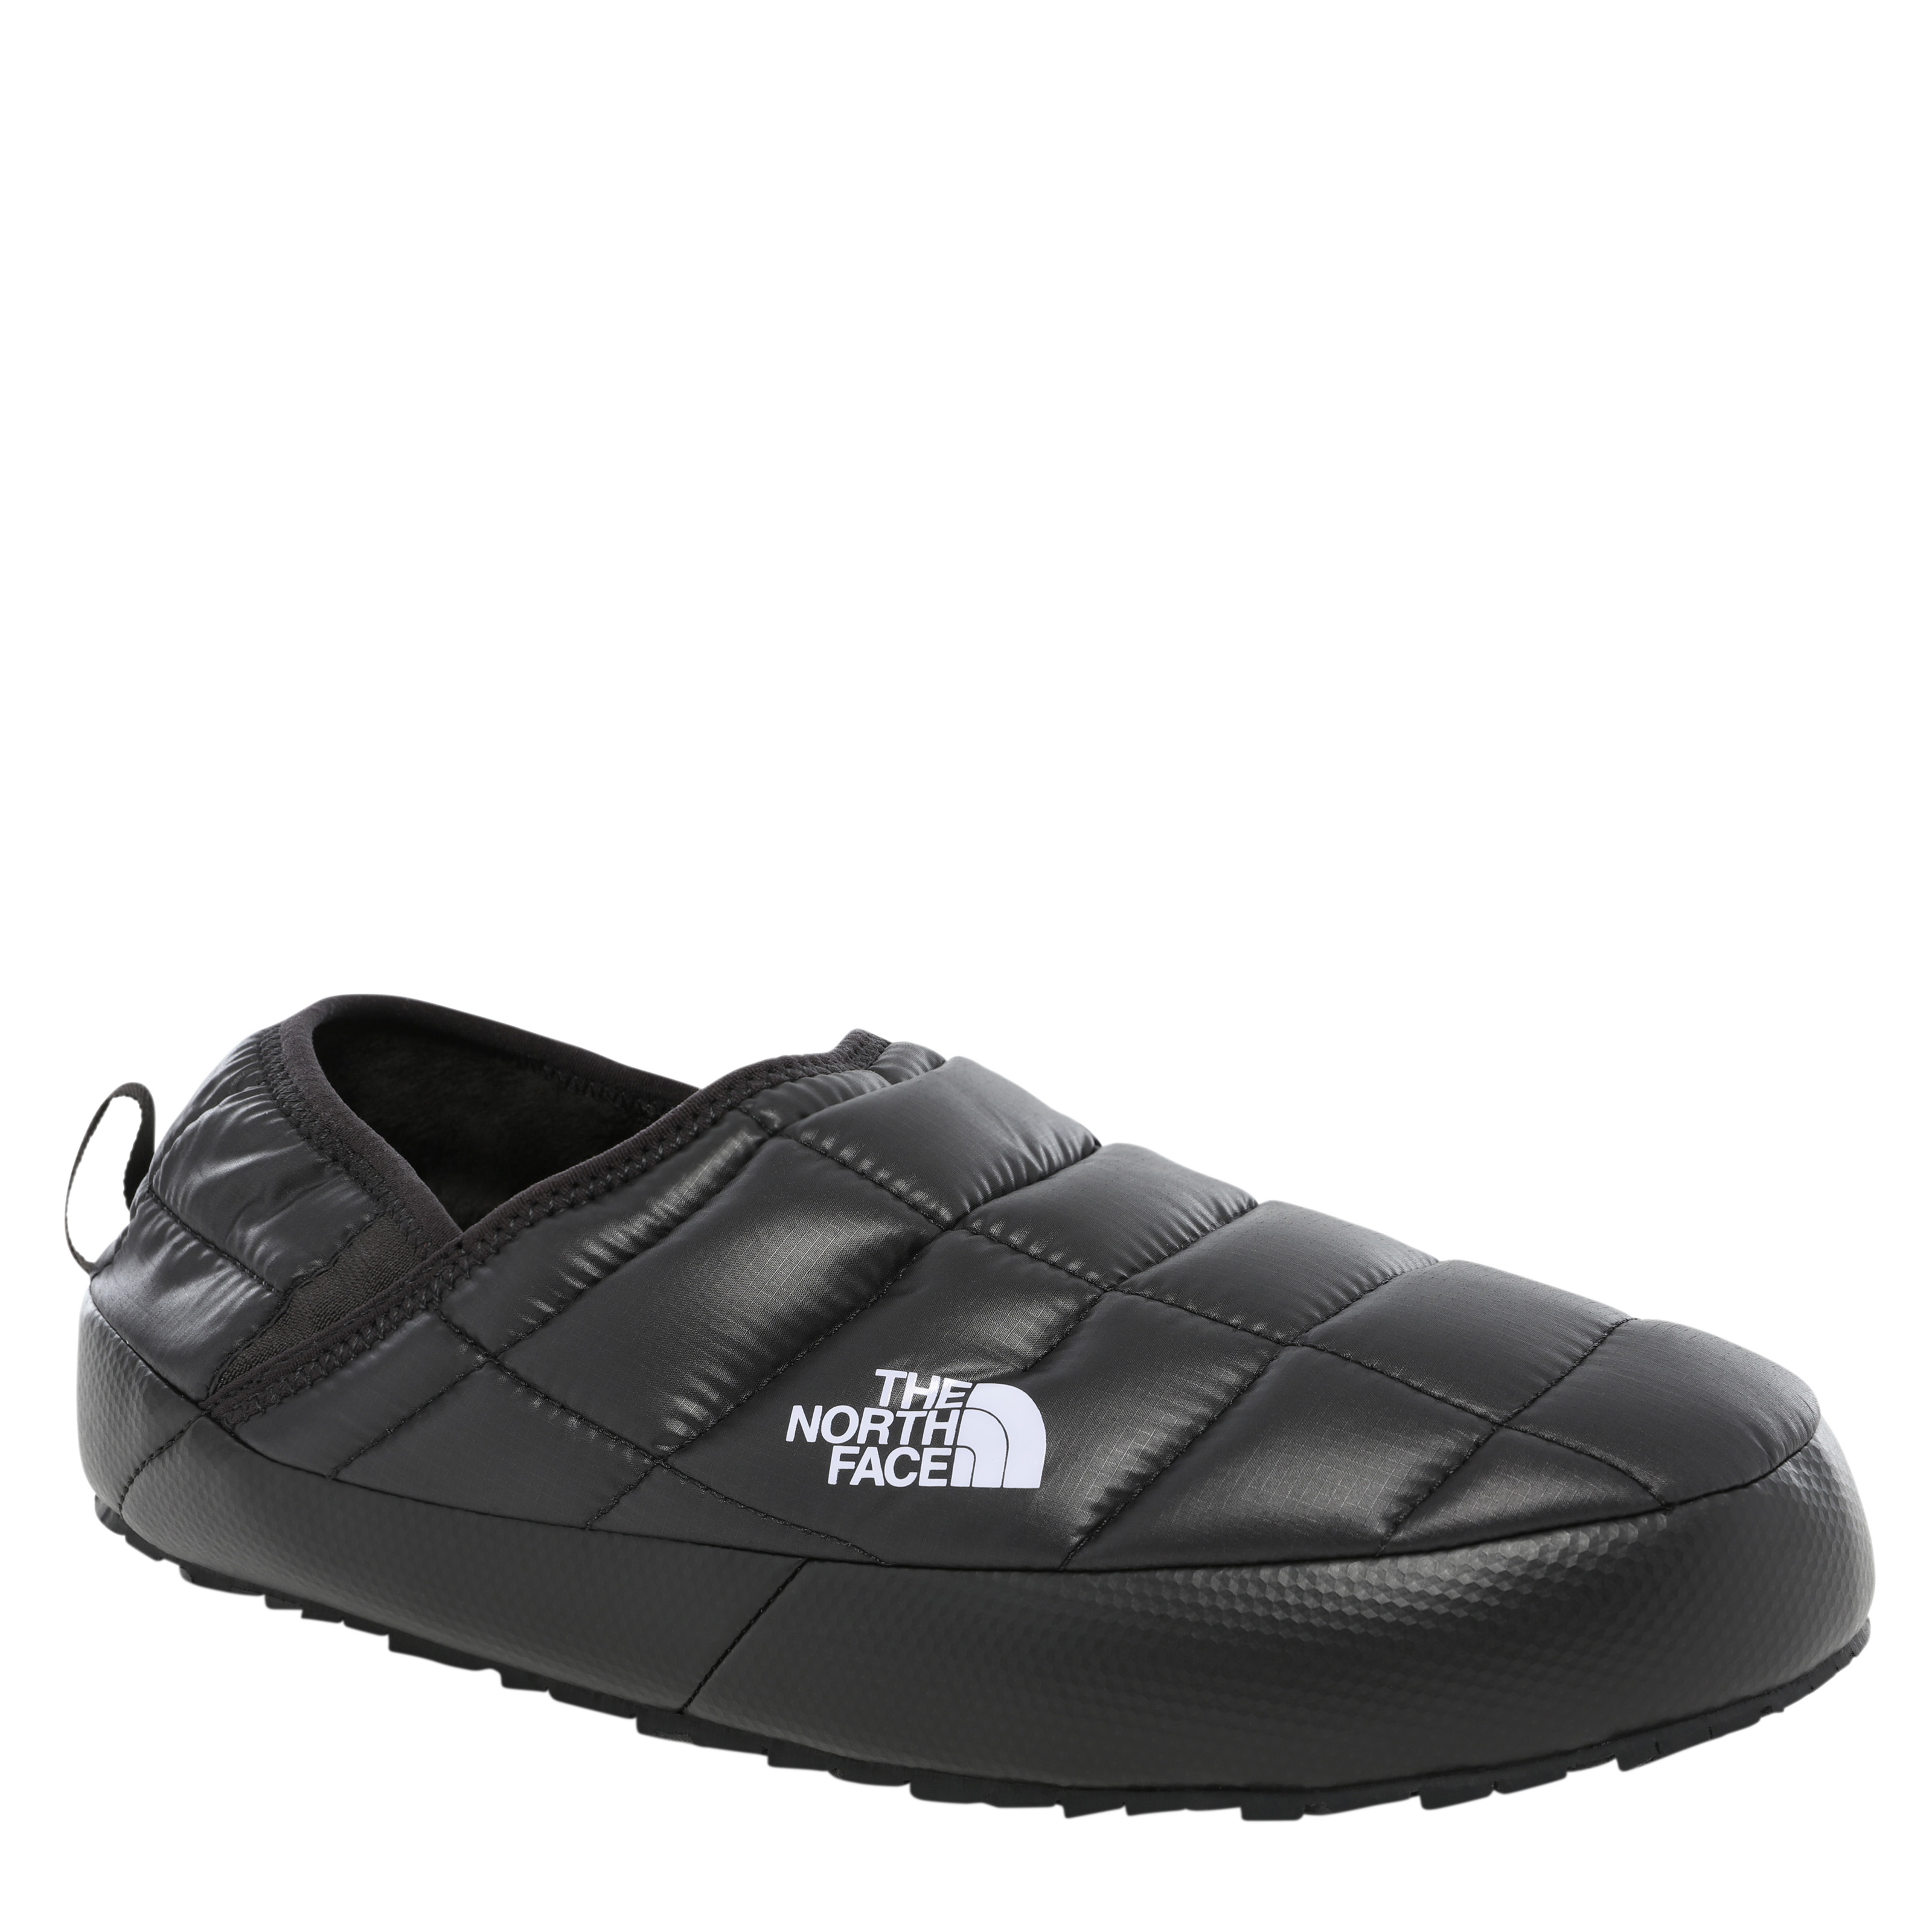 Pantofle damskie THE NORTH FACE Thermoball Traction Mule V 3UZN_KY4_ALT4 miniaturka